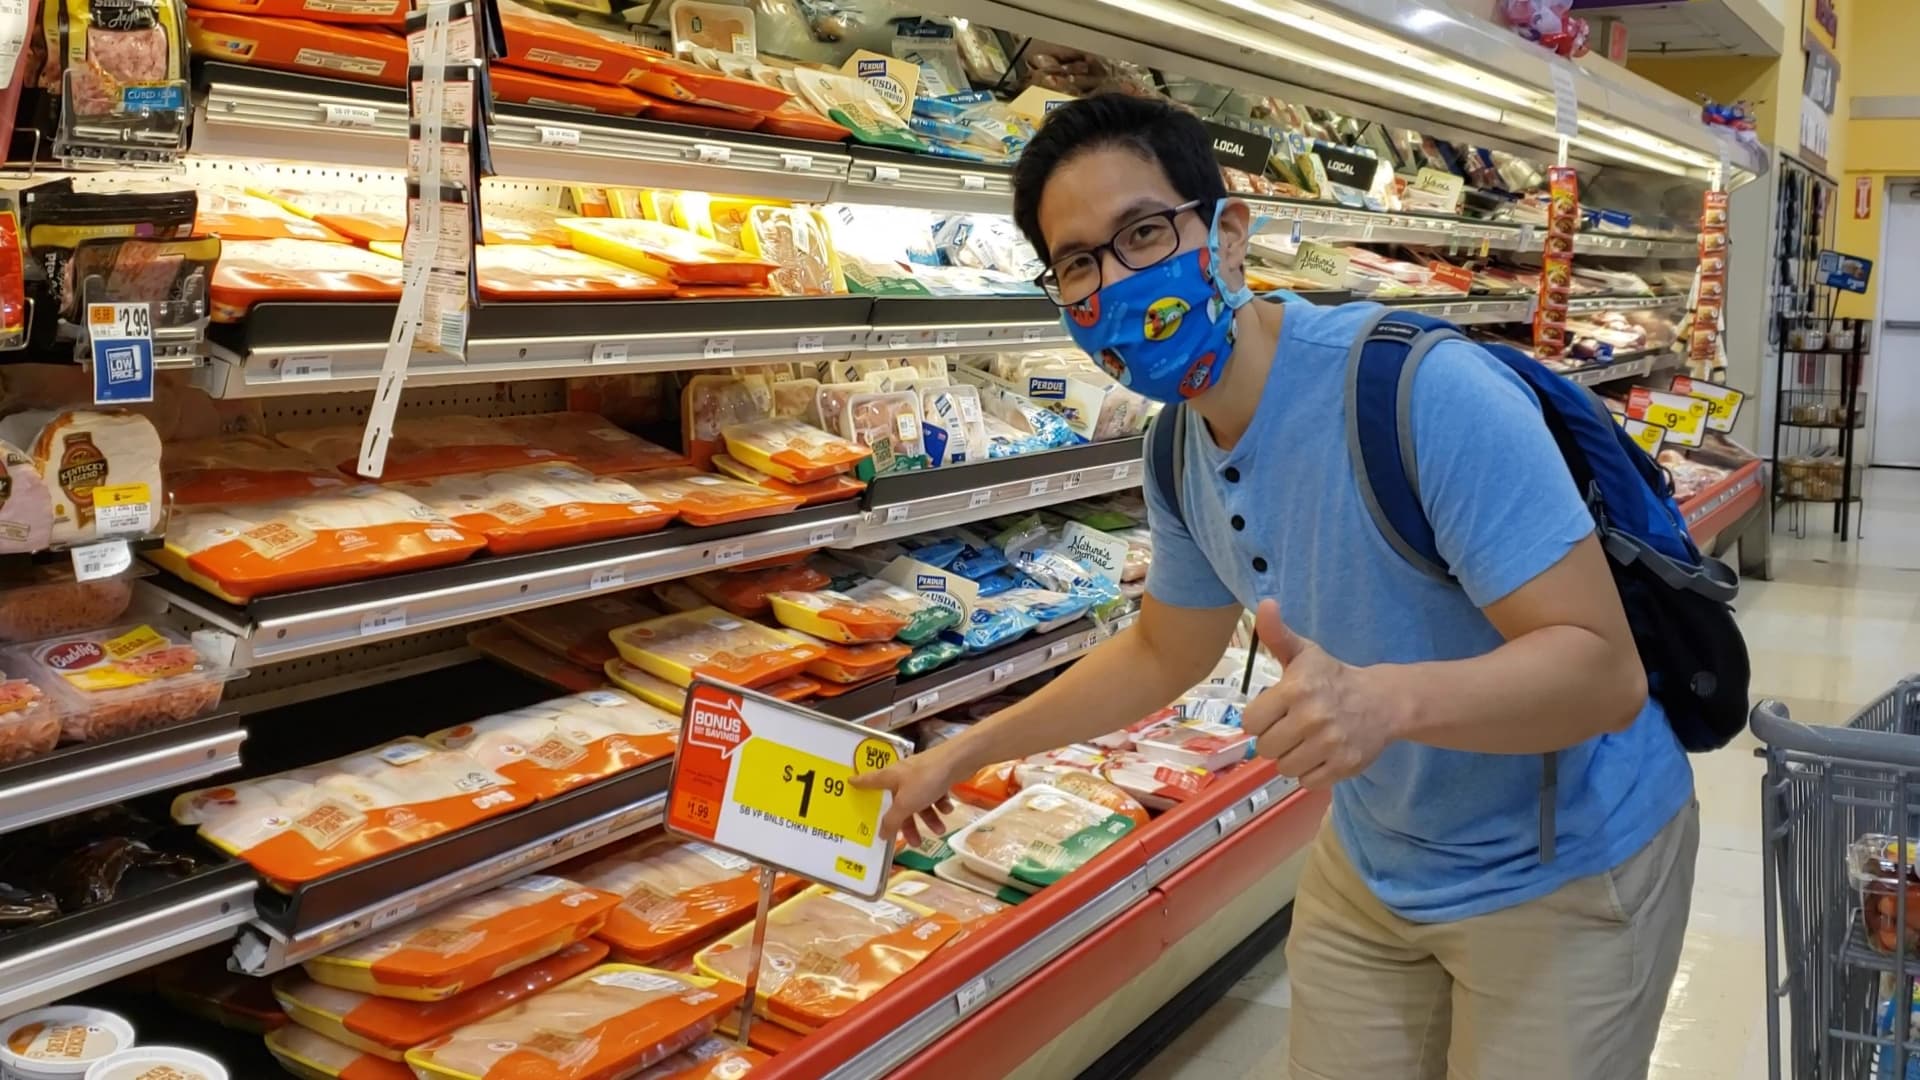 Andrew Tiu always looks for deals while grocery shopping. He's even memorized the prices of chicken at different grocery stores in his neighborhood.